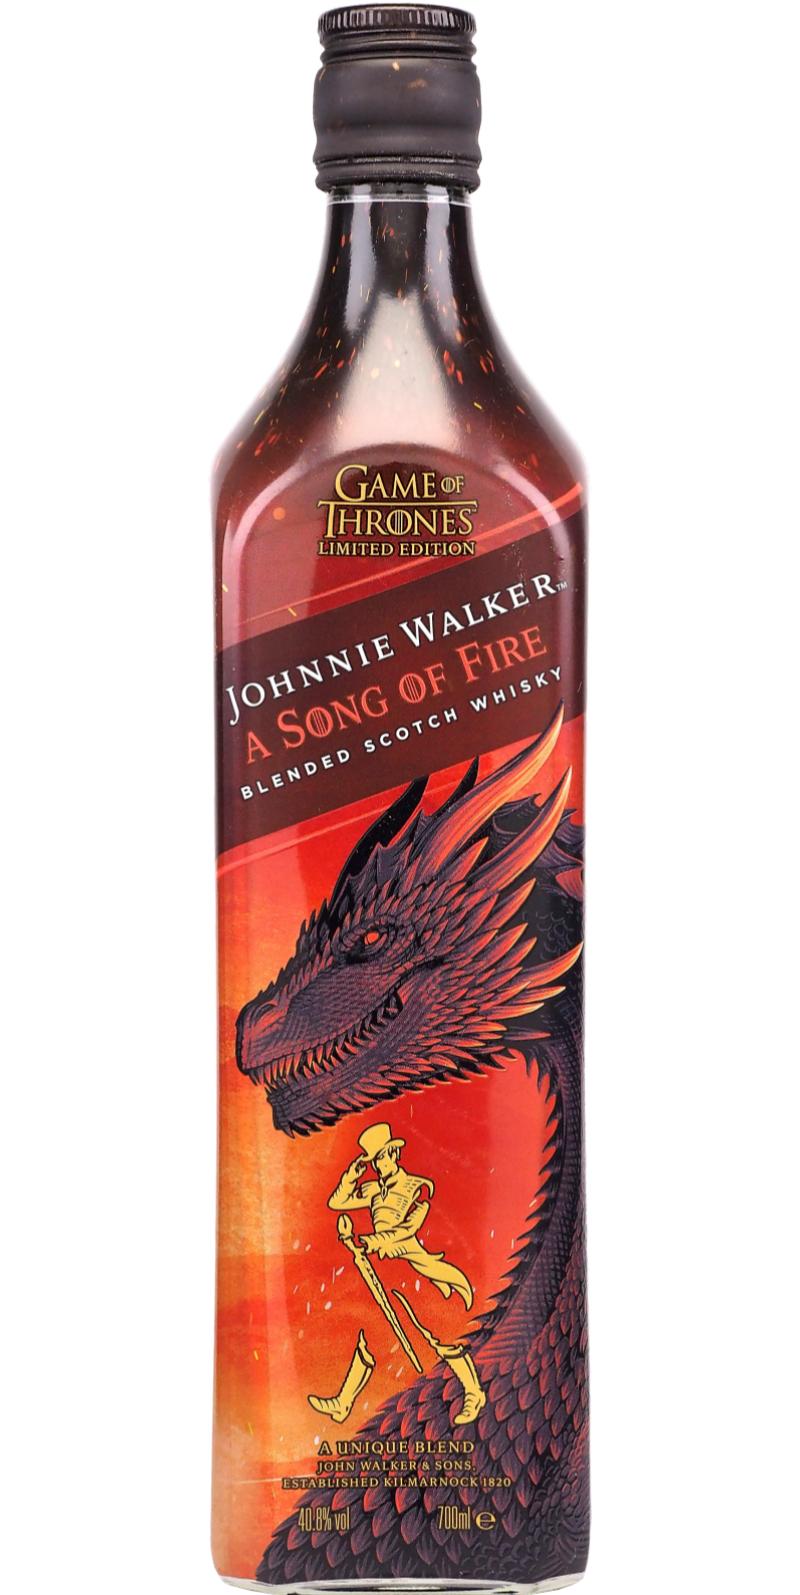 Johnnie Walker A song of Fire Blended Scotch Whisky